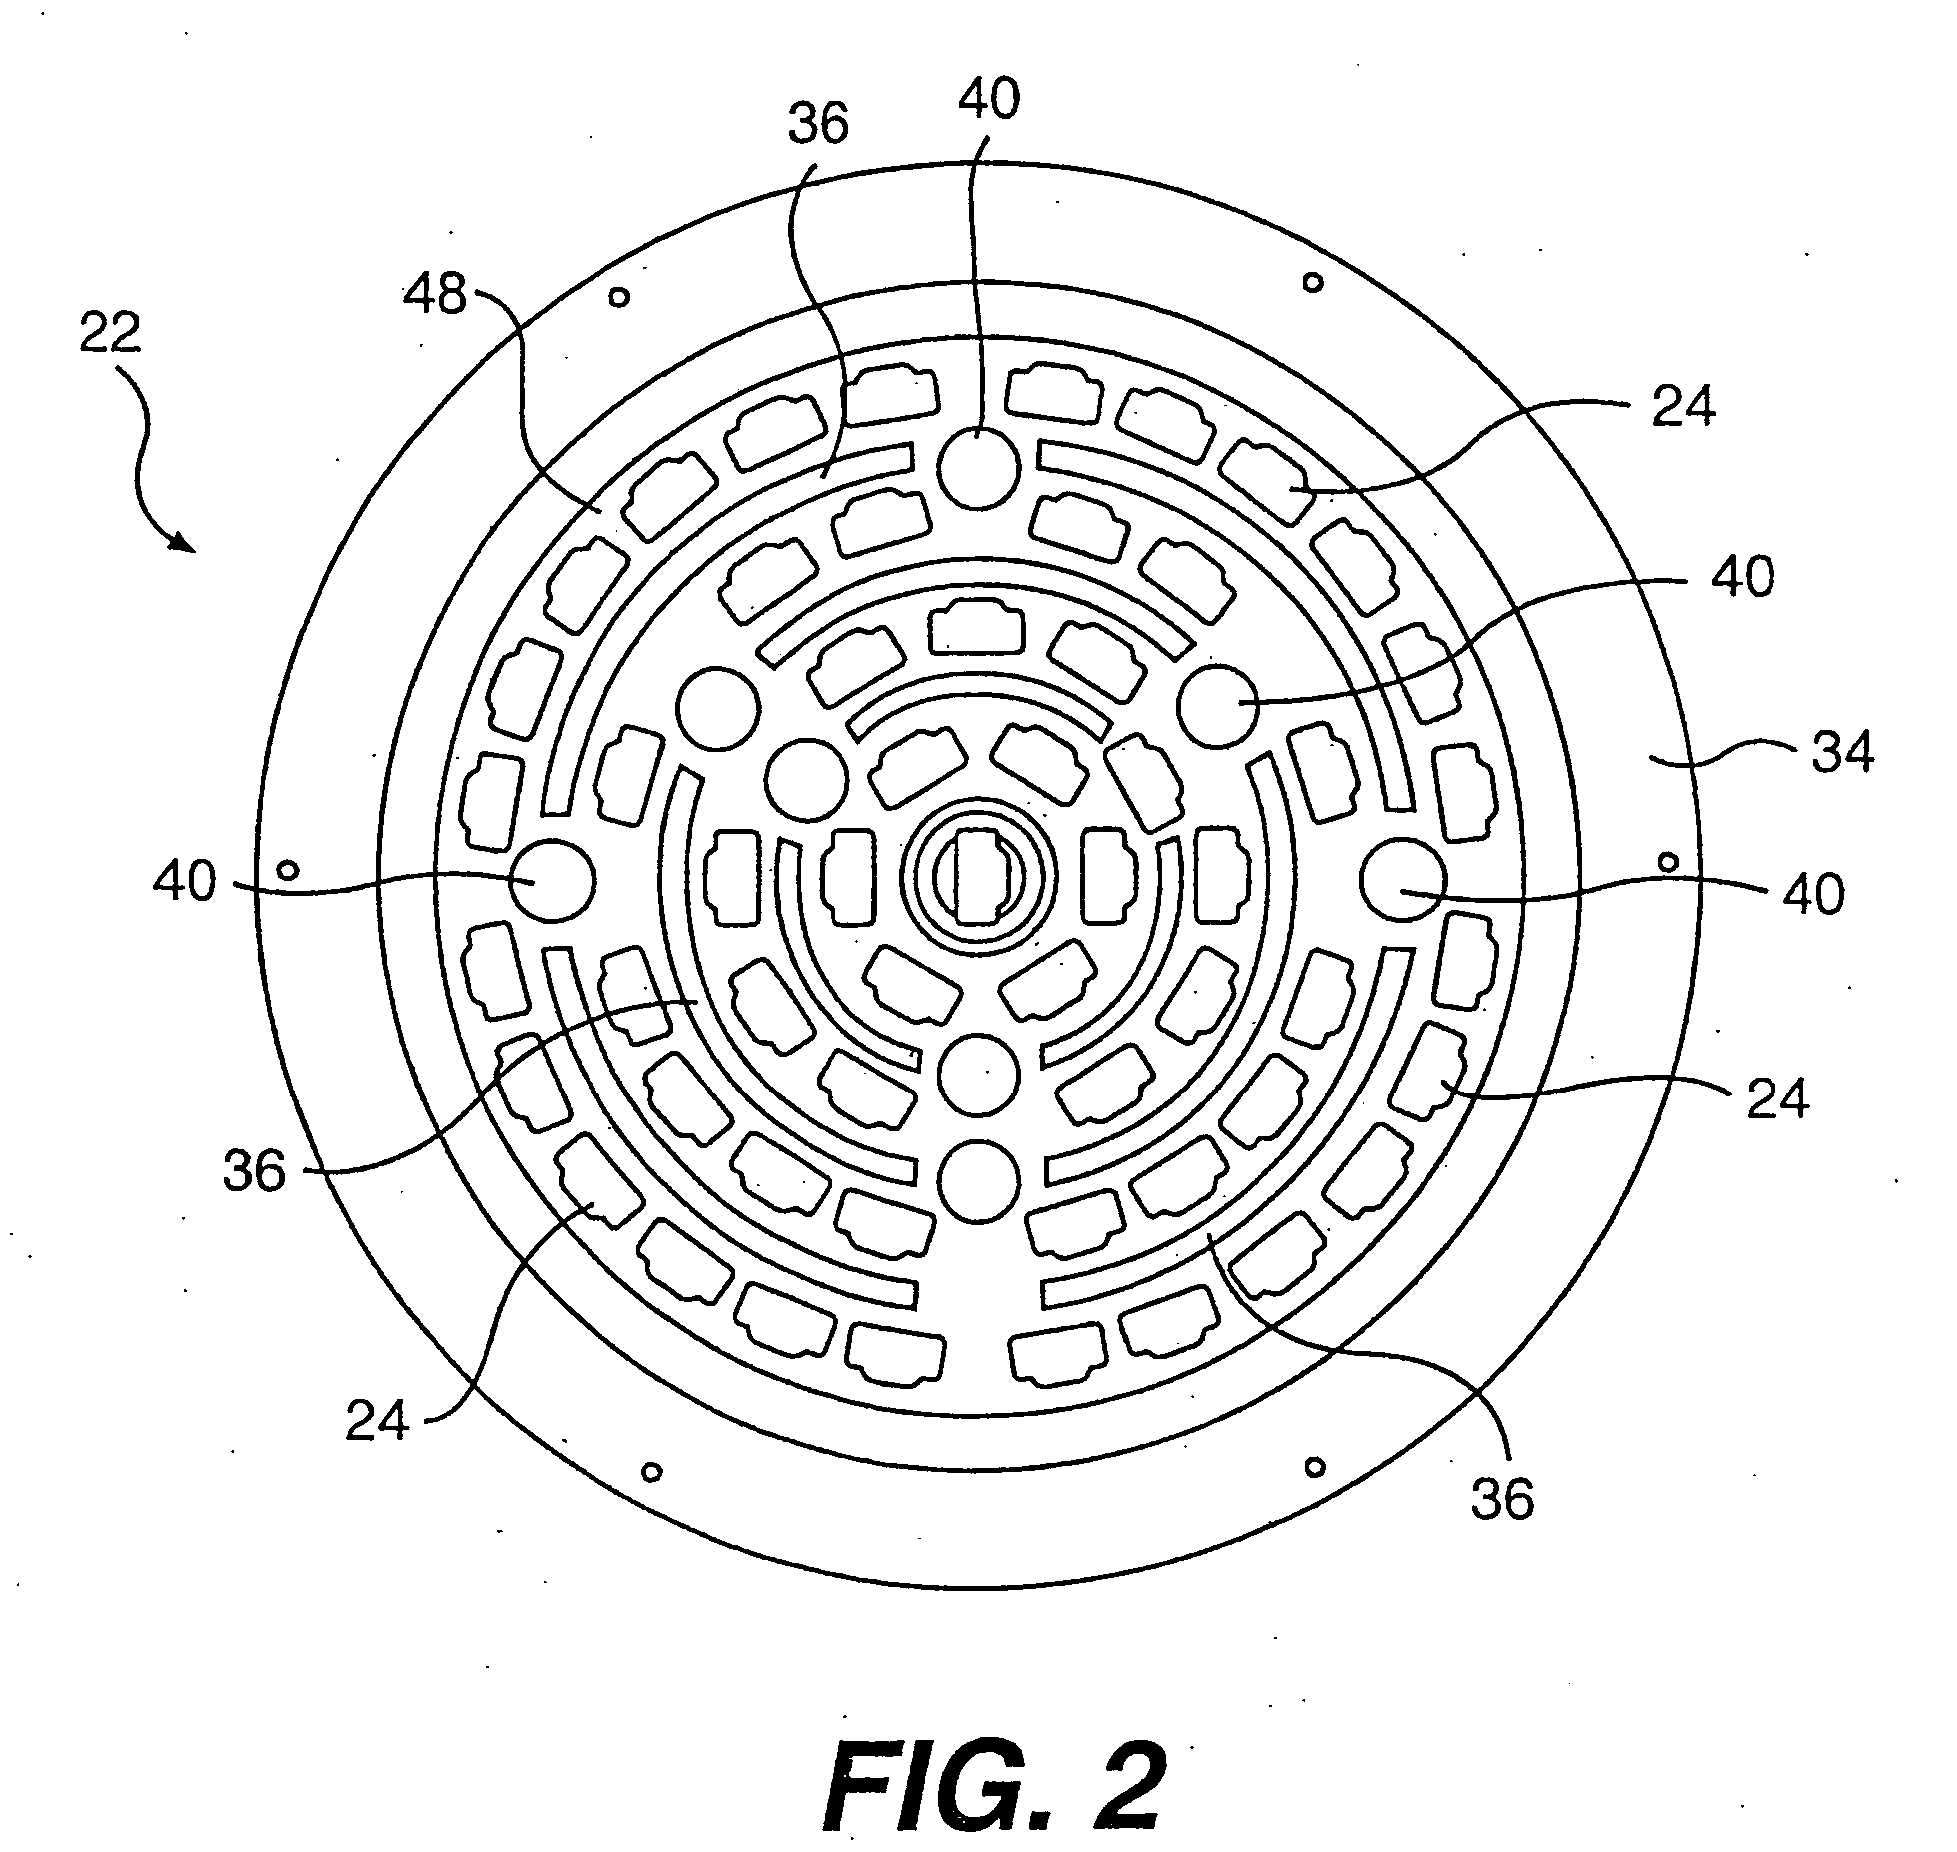 Heating device for heating semiconductor wafers in thermal processing chambers